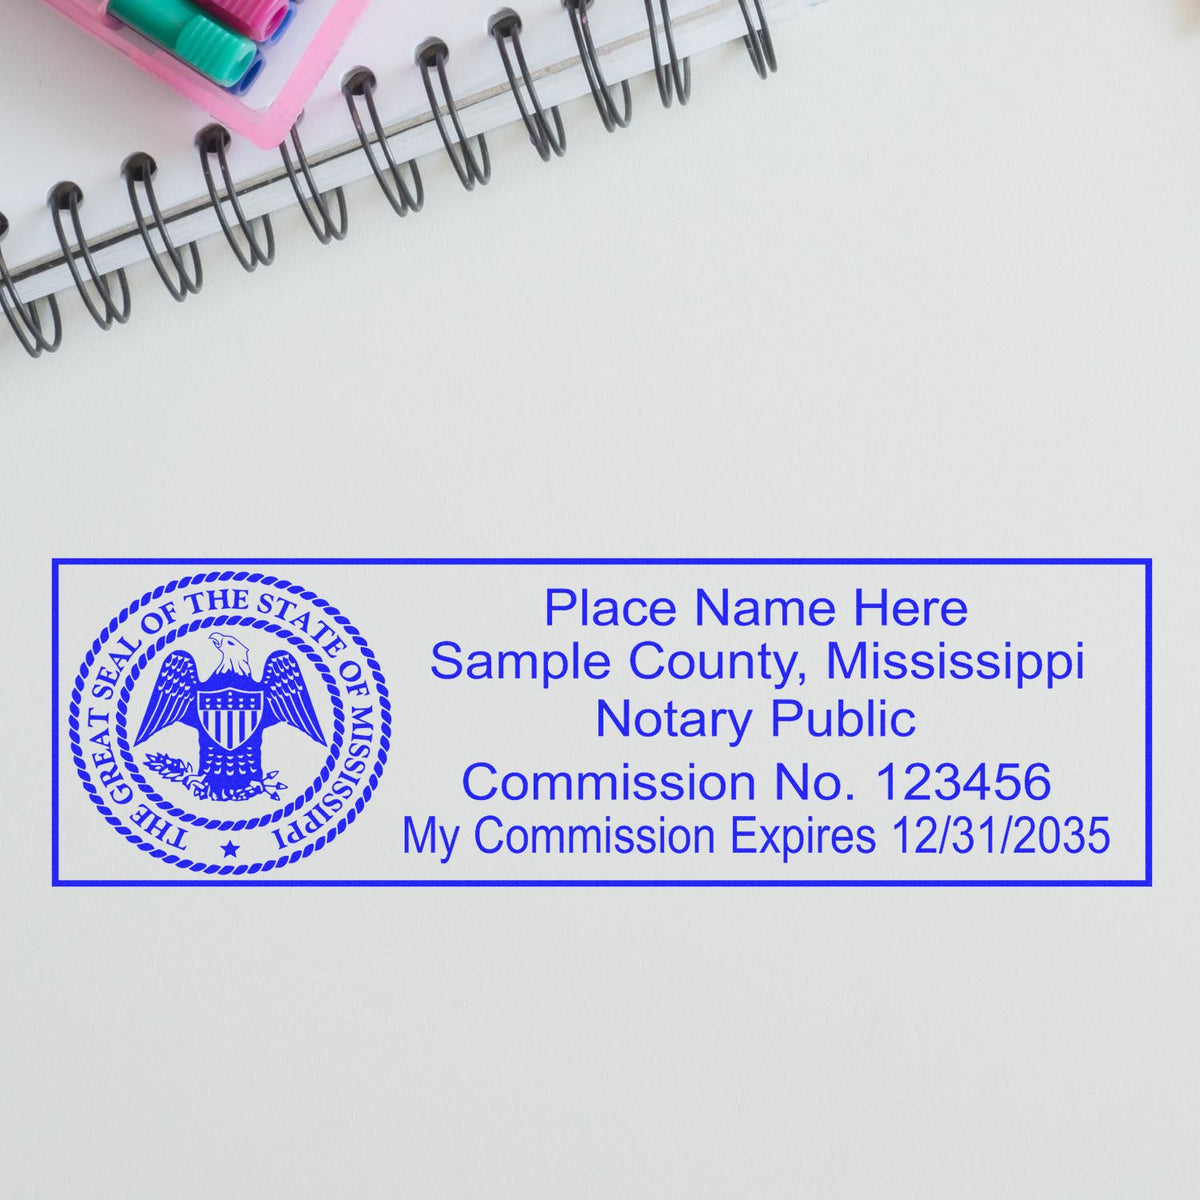 An alternative view of the PSI Mississippi Notary Stamp stamped on a sheet of paper showing the image in use